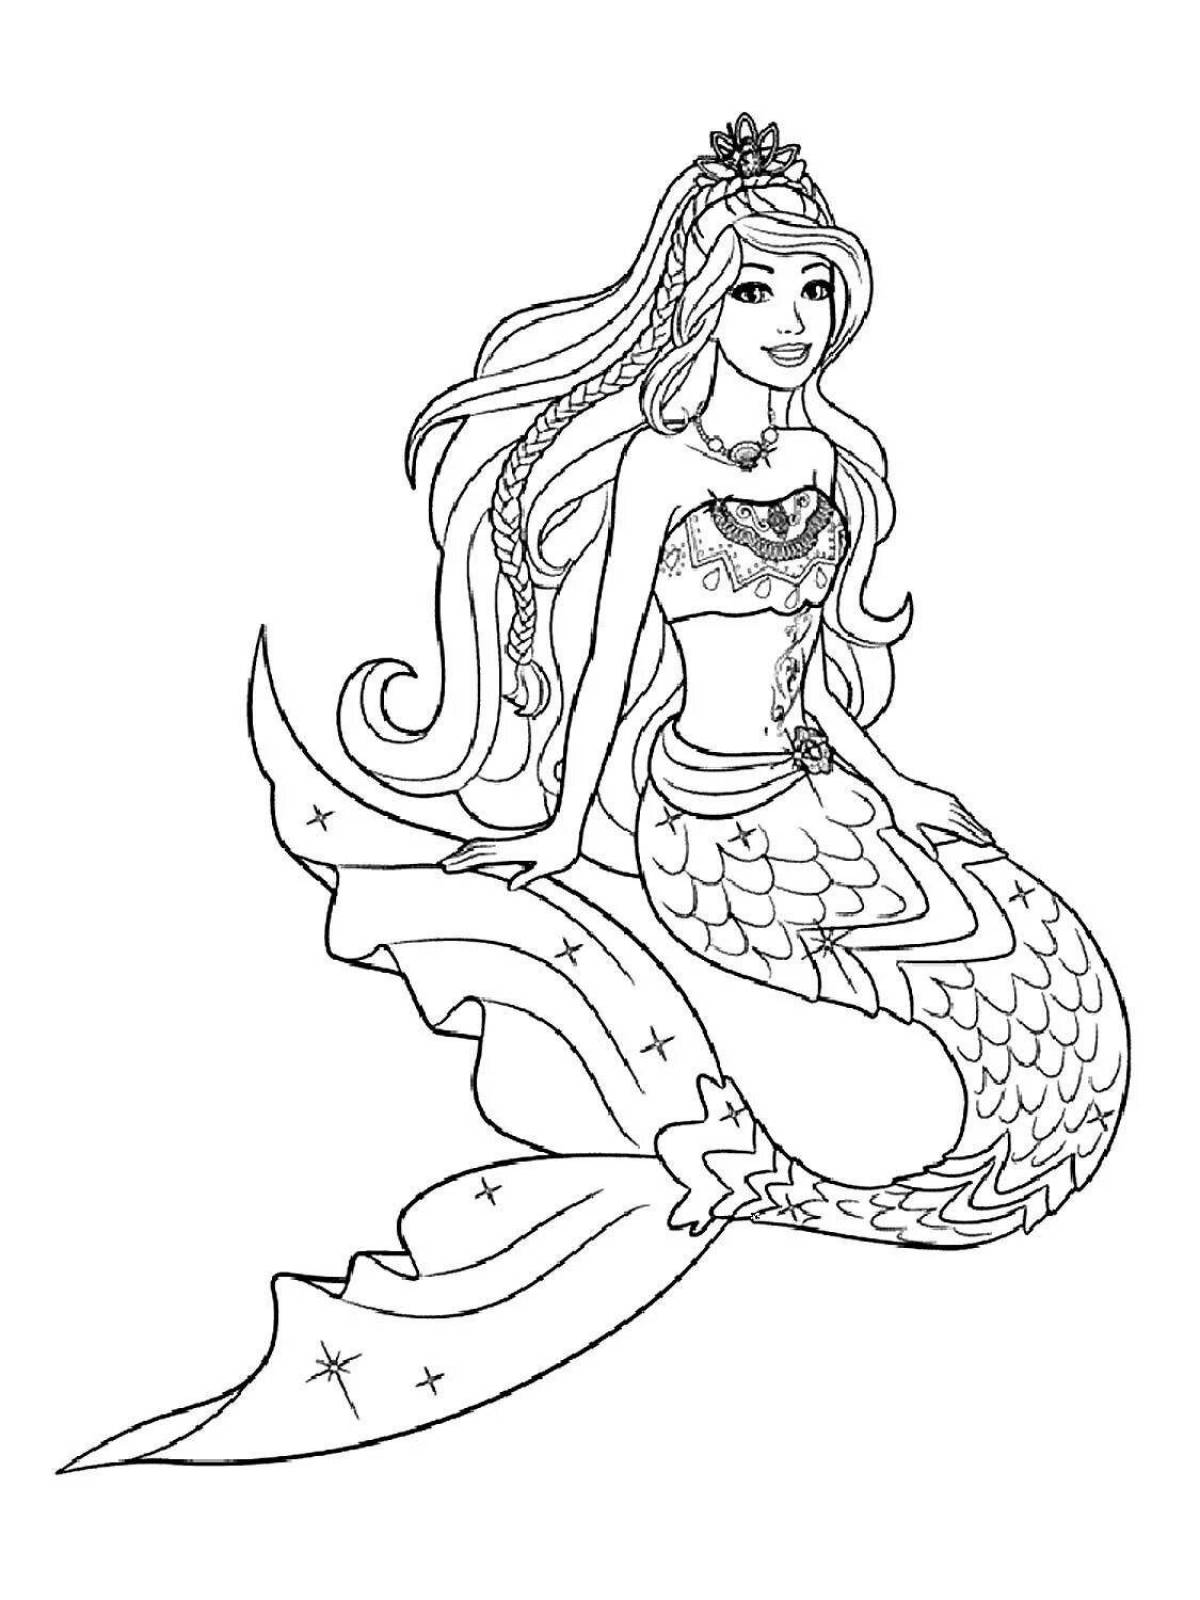 Coloring page shining queen of mermaids